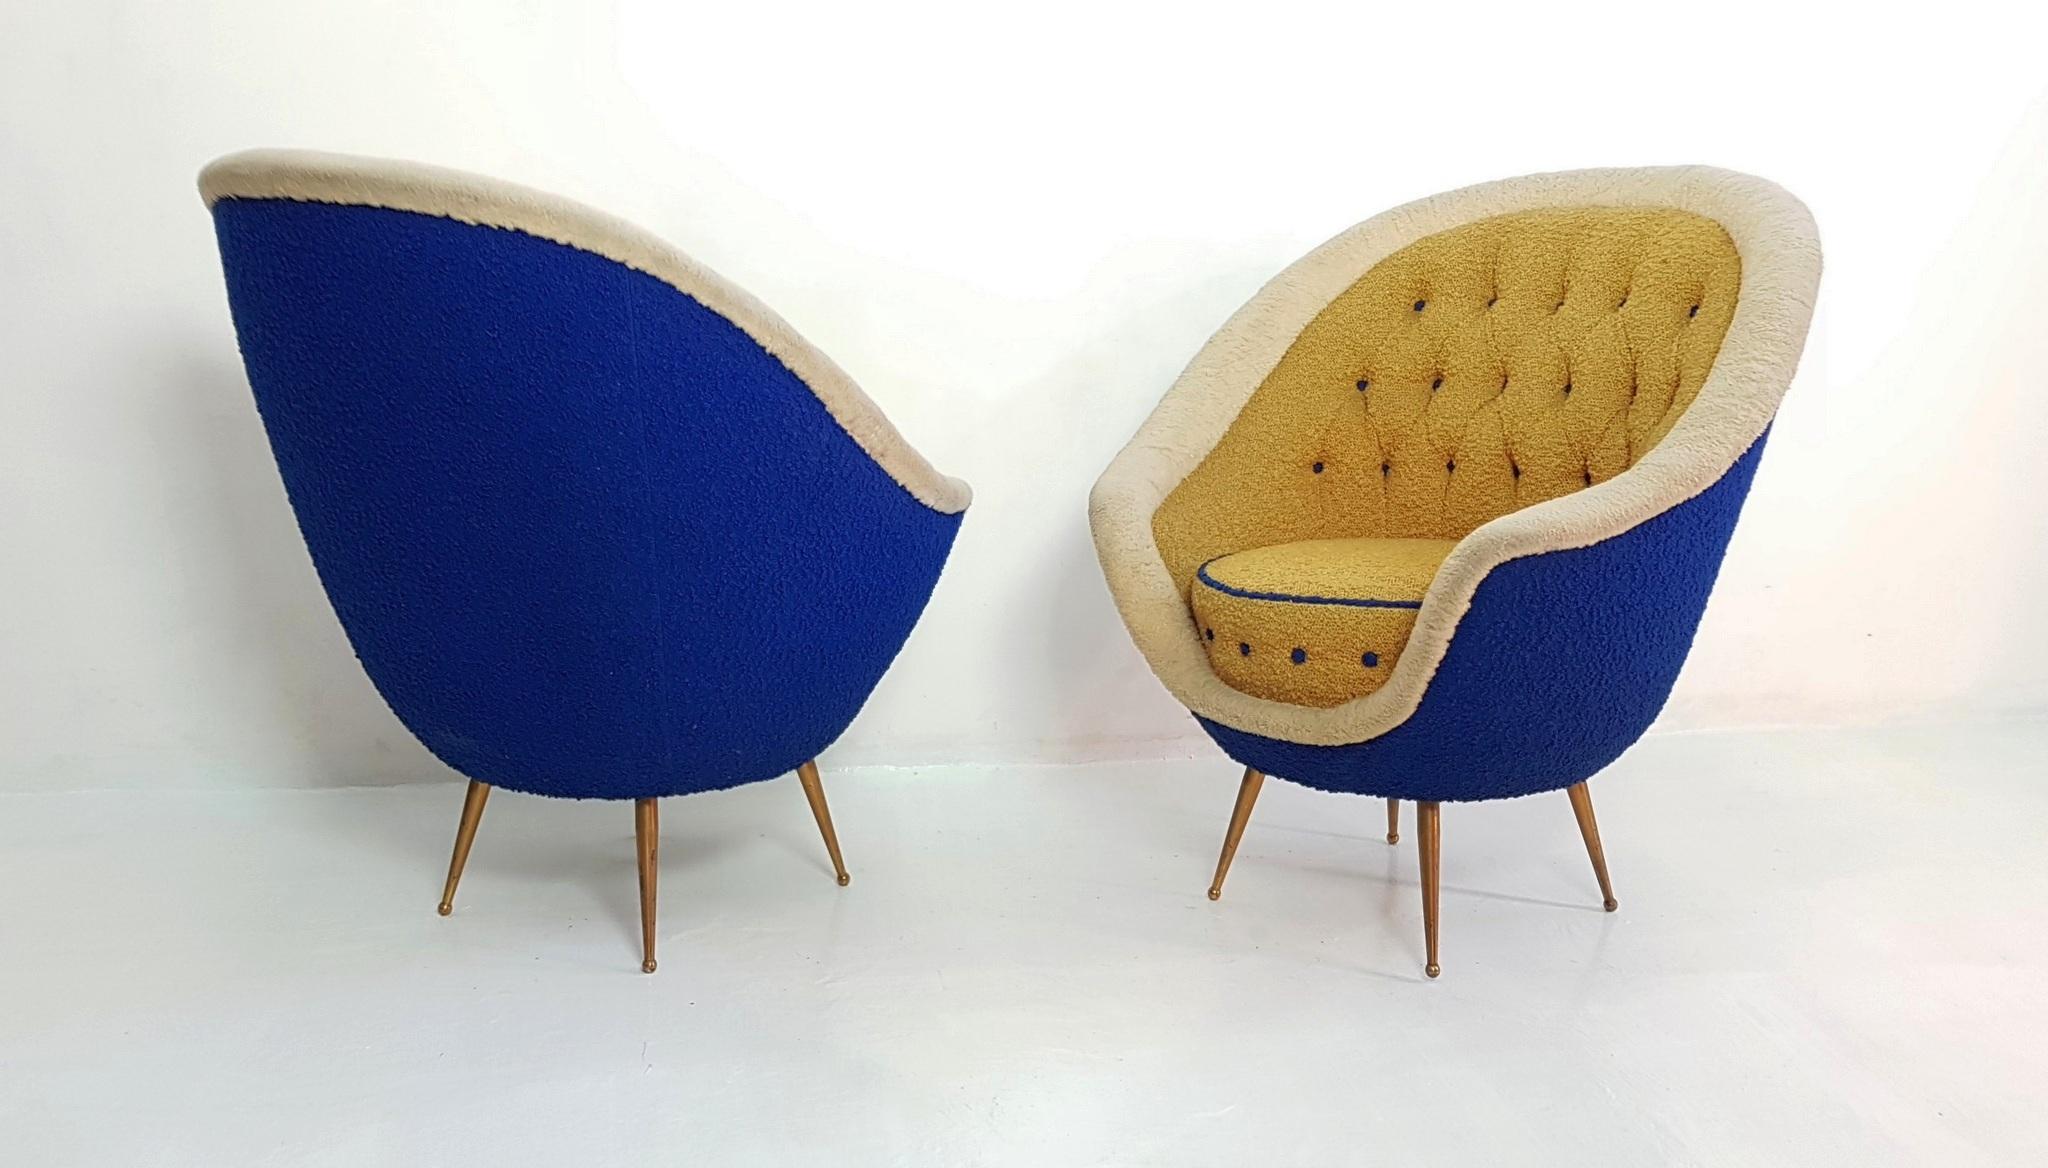 A pair of super elegant Italian armchairs in their original wool fabric in excellent condition produced by ISA Bergamo.
This pair of armchairs comes directly from the original buyer which is how we know the year of production, (1959). The chairs